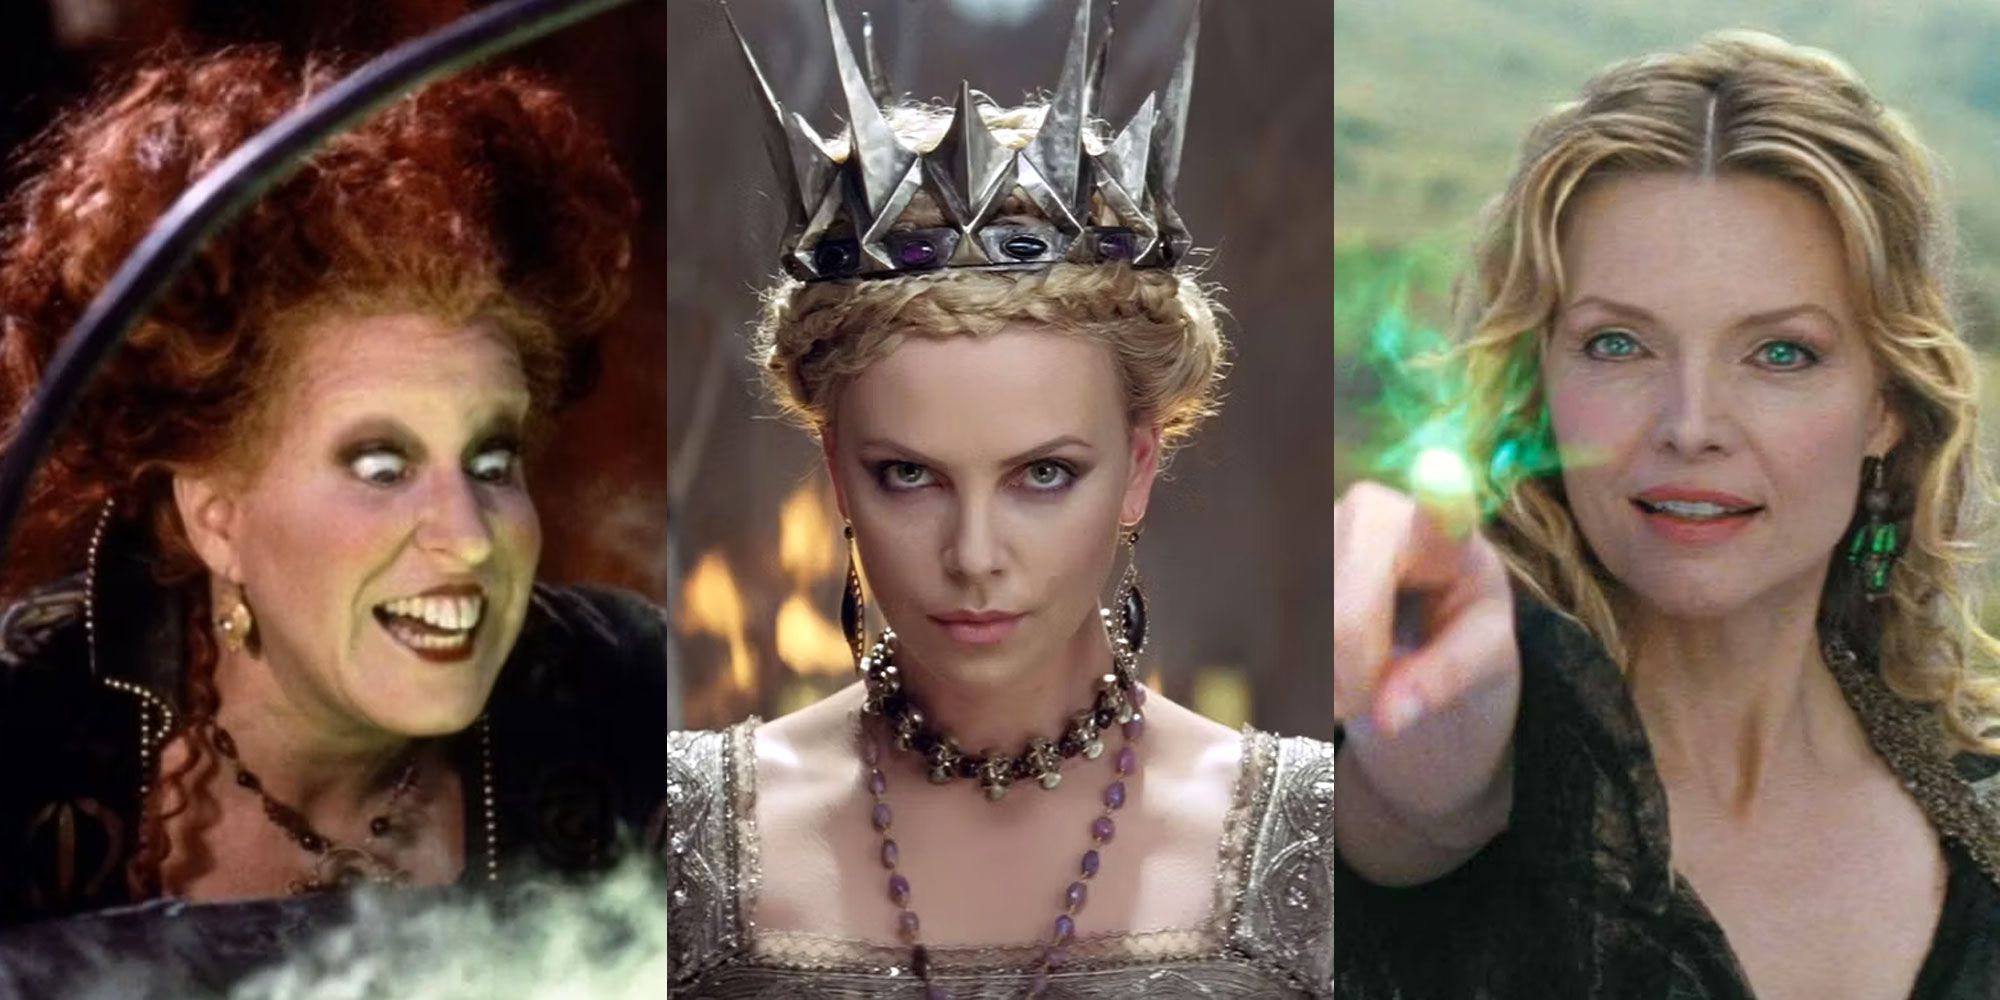 A split image features Winifred Sanderson in Hocus Pocus, Ravenna in Snow White And The Huntsman, and Lamia in Stardust